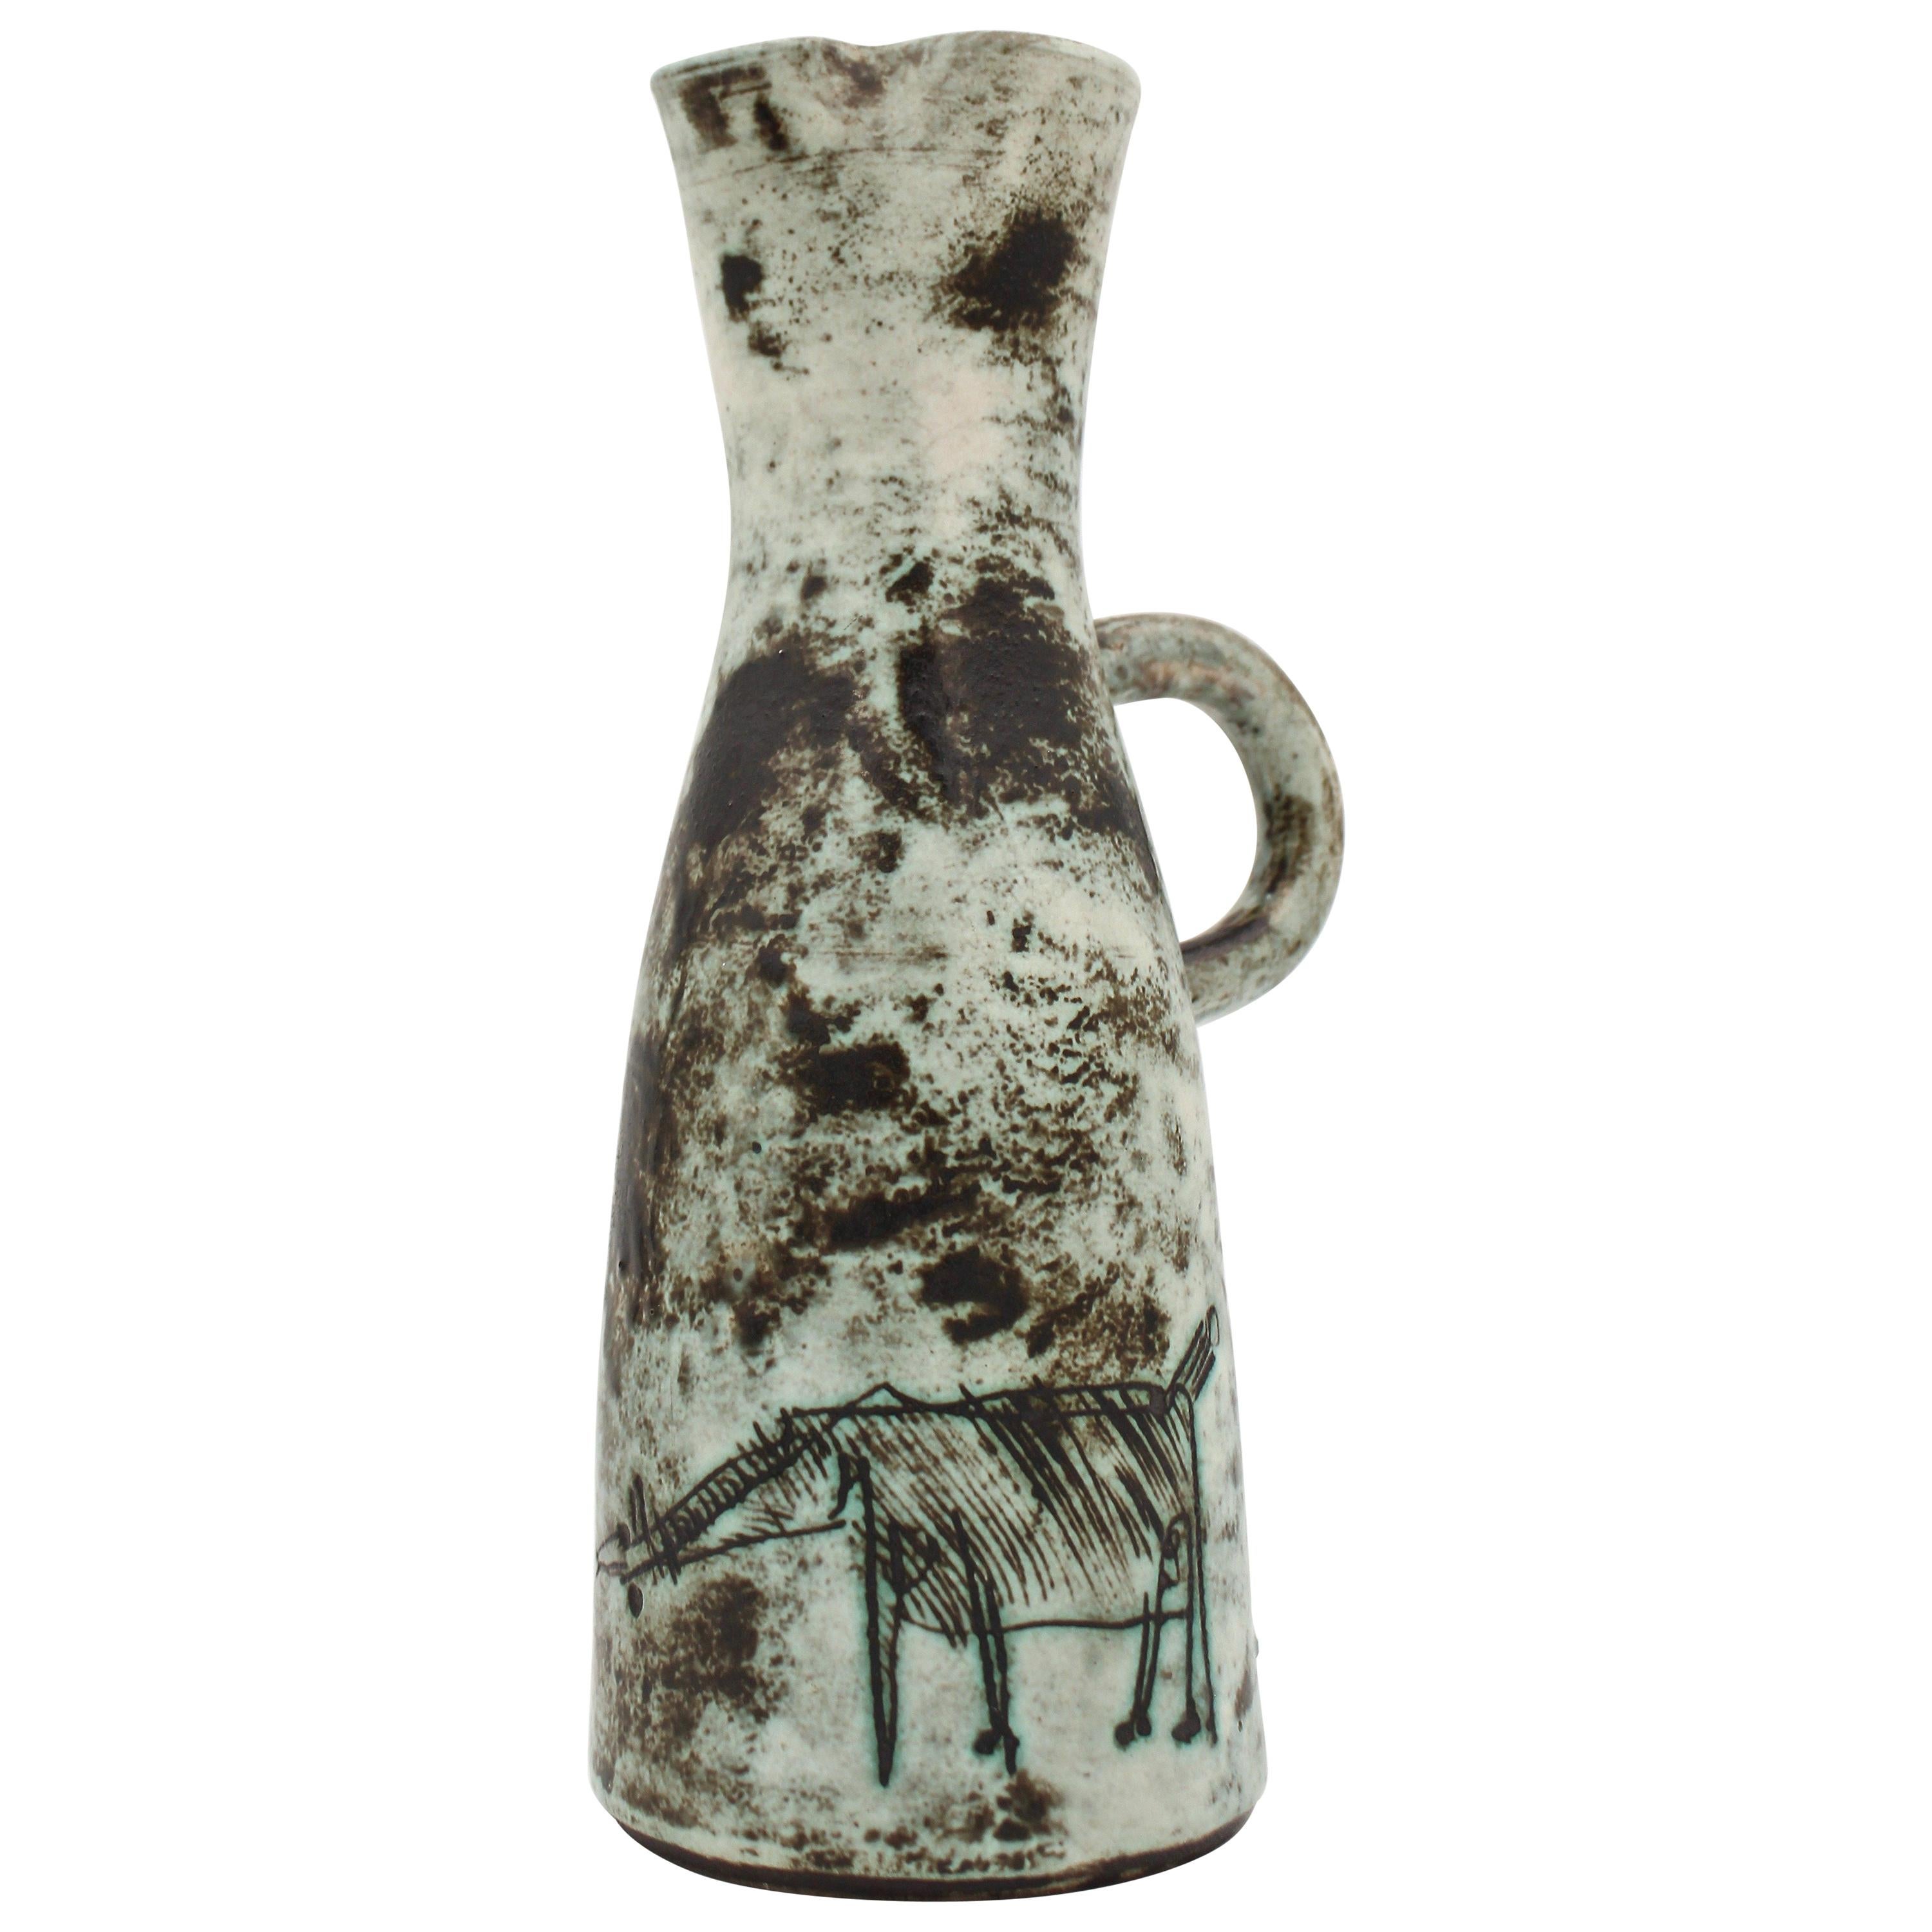 Midcentury French Ceramic Pitcher by Jacques Blin, 1950s